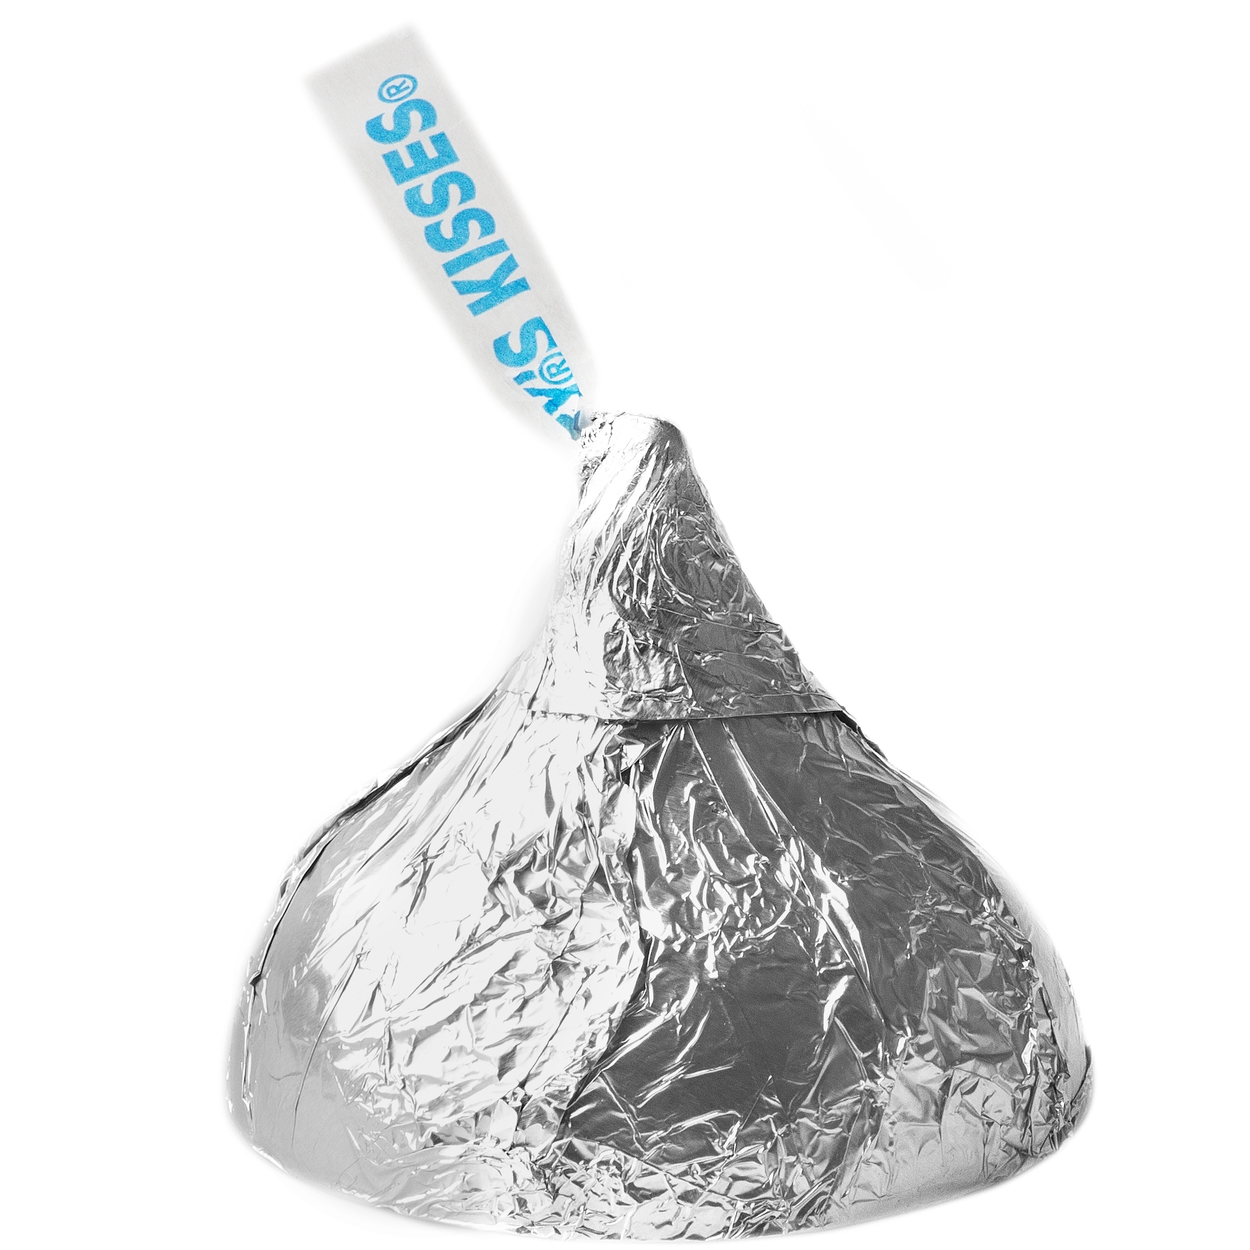 Make Giant Hershey's Kisses from Foil | Chica and Jo